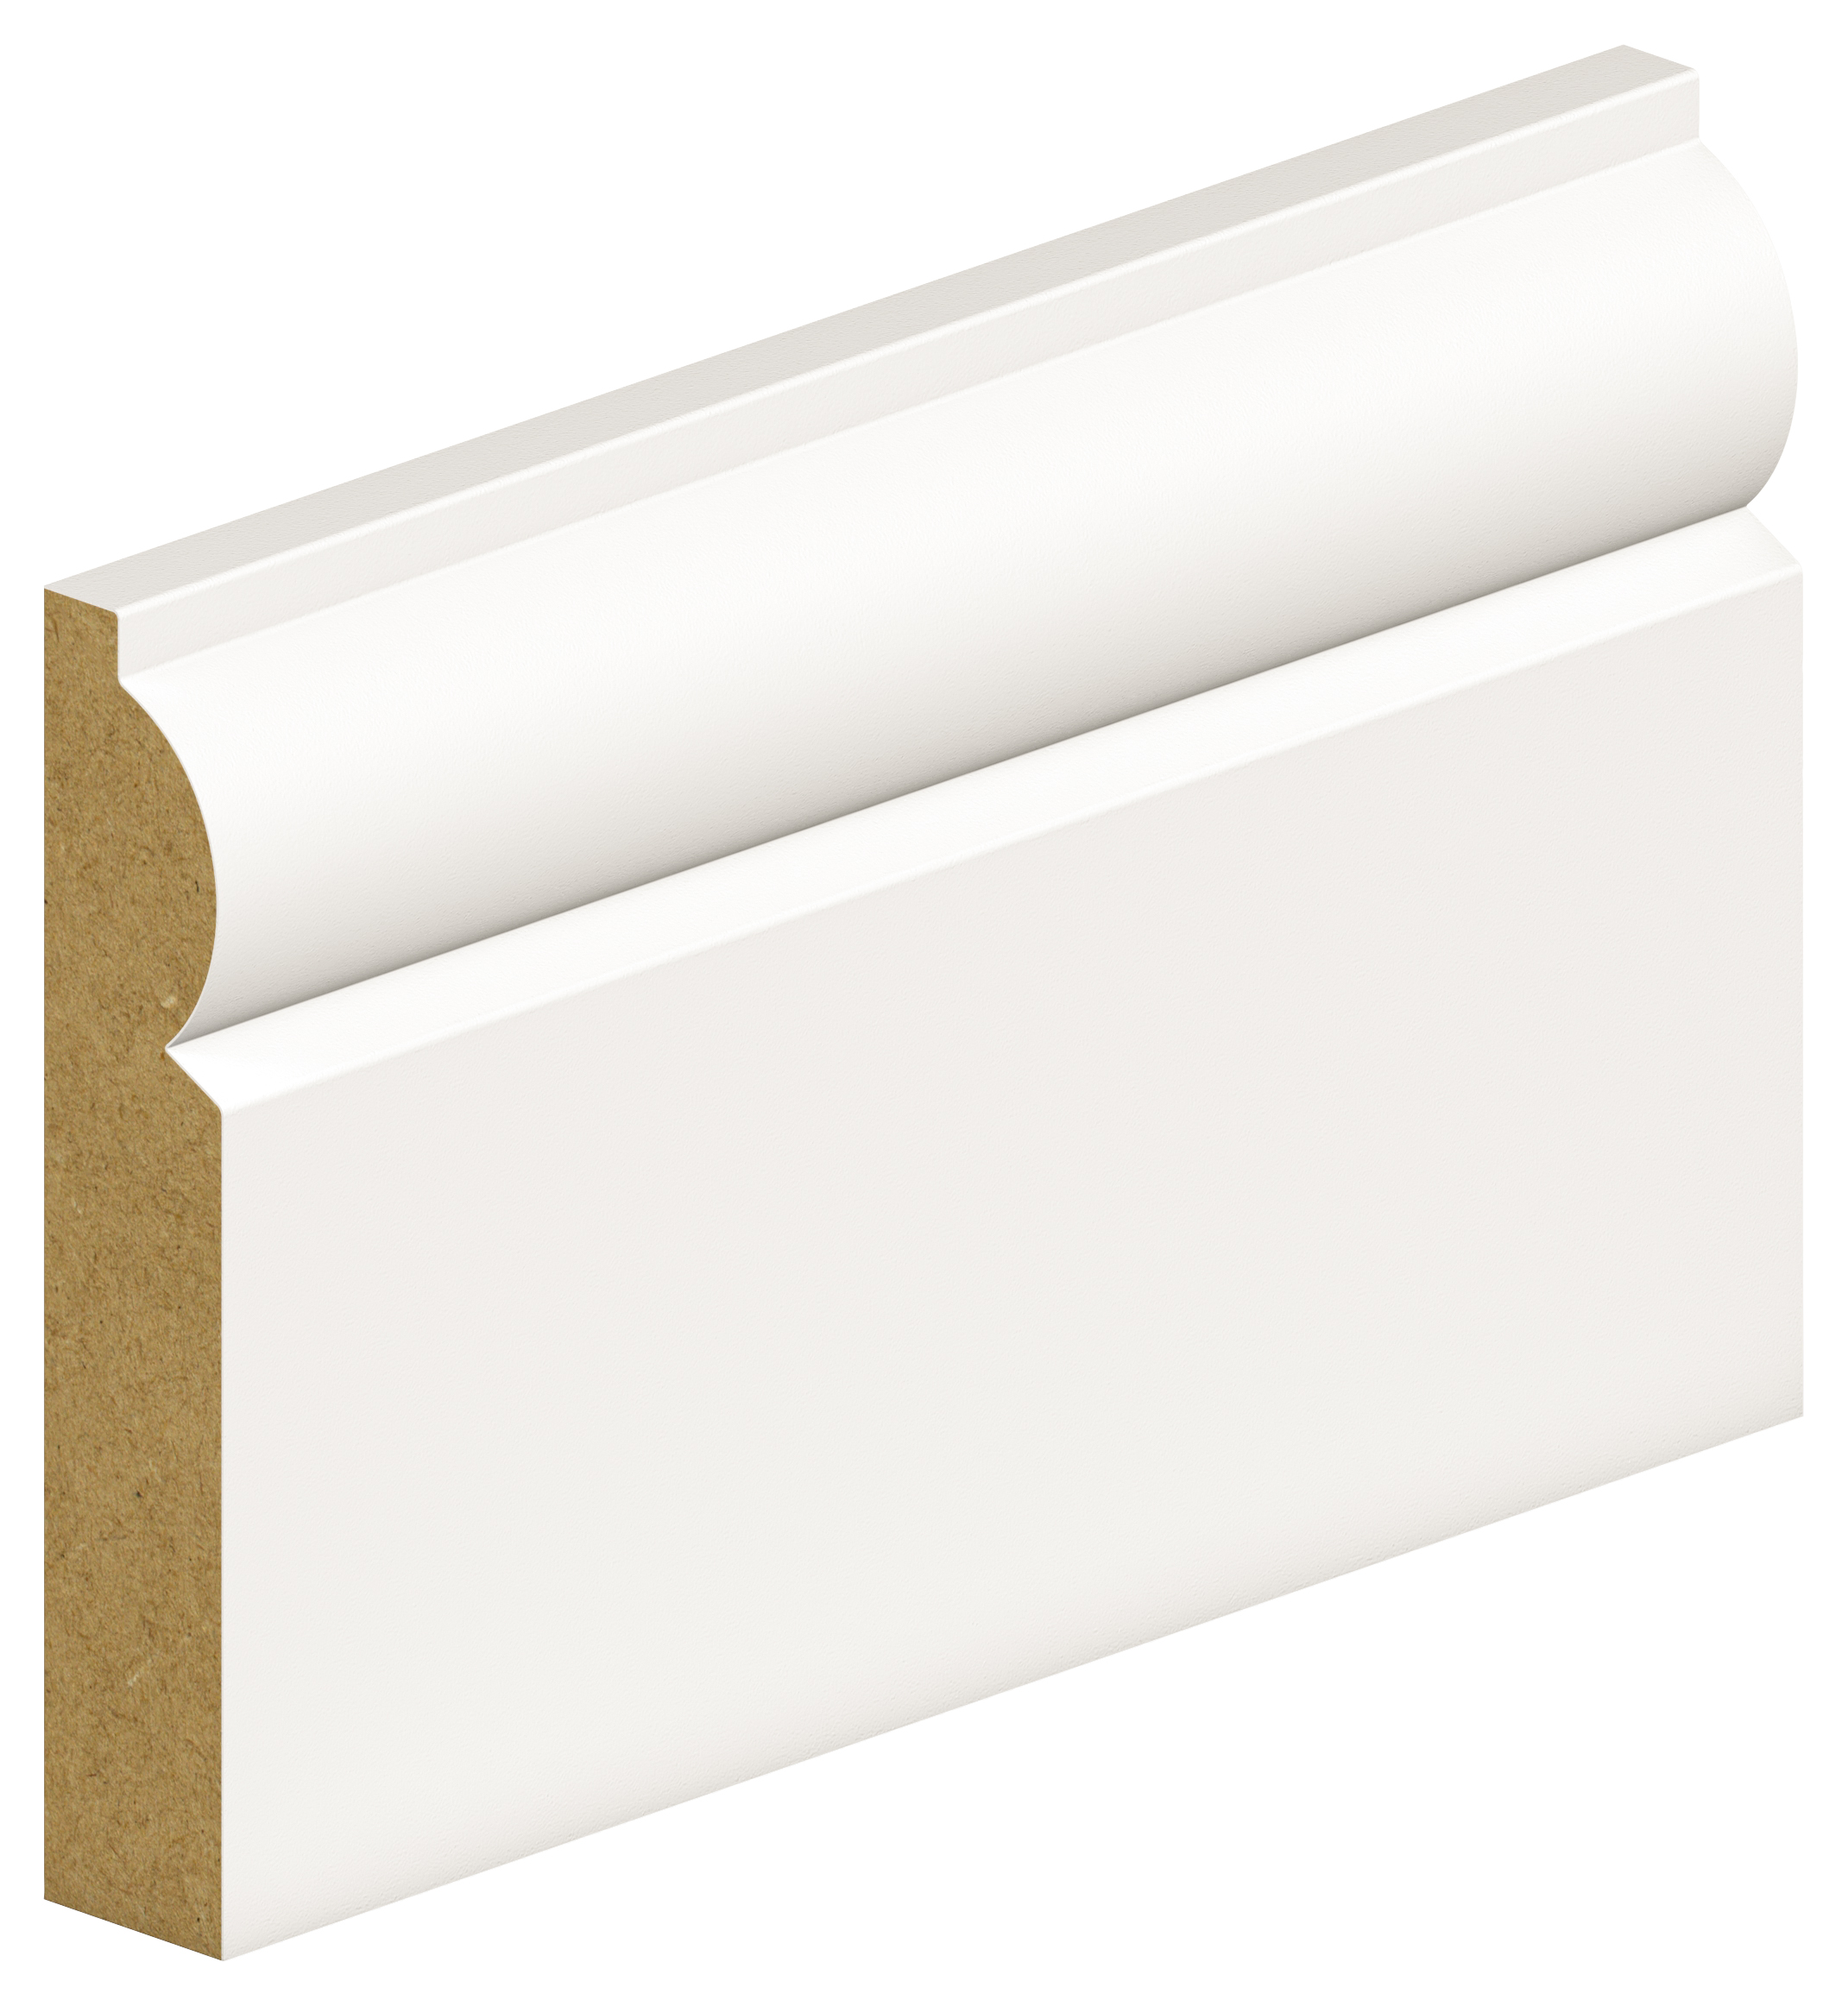 Image of Torus Primed MDF Architrave - 18 x 69 x 2200mm - Pack of 5